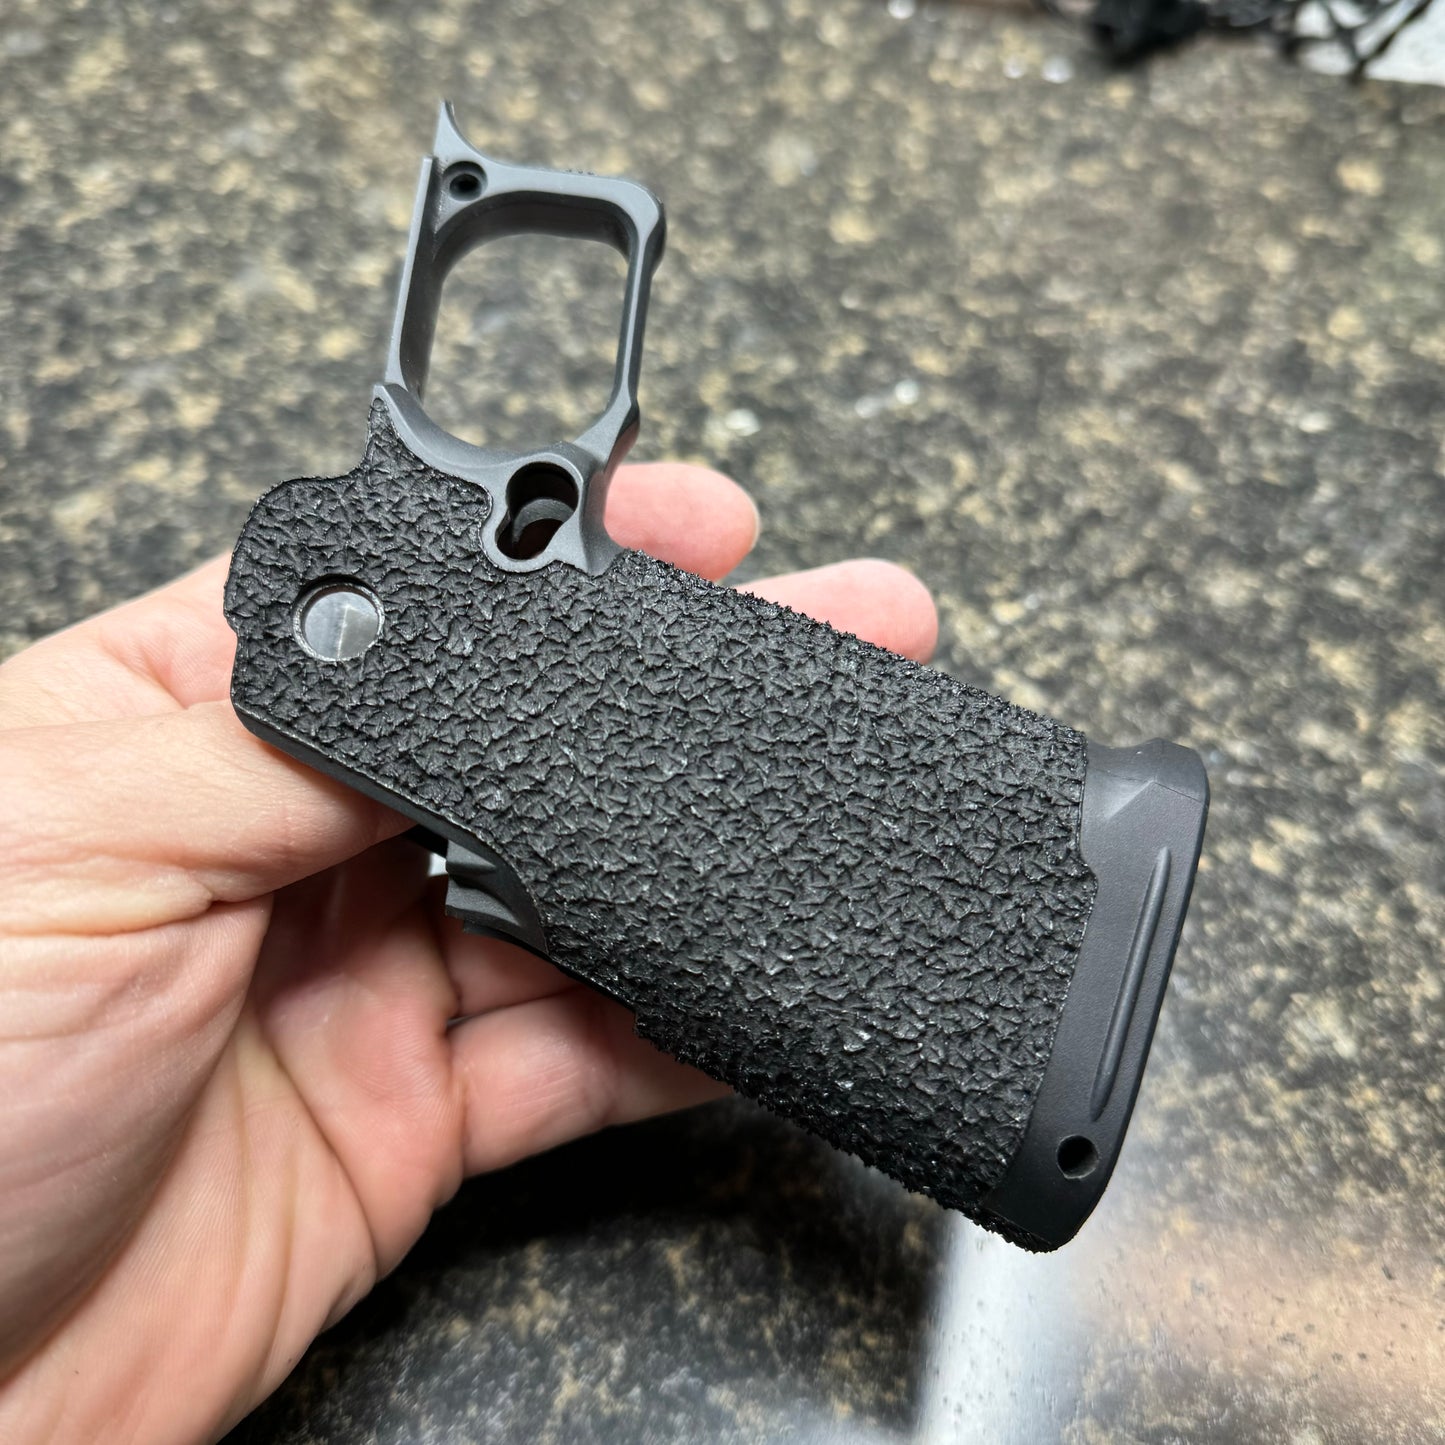 Springfield Armory Prodigy (1911 DS) grip package